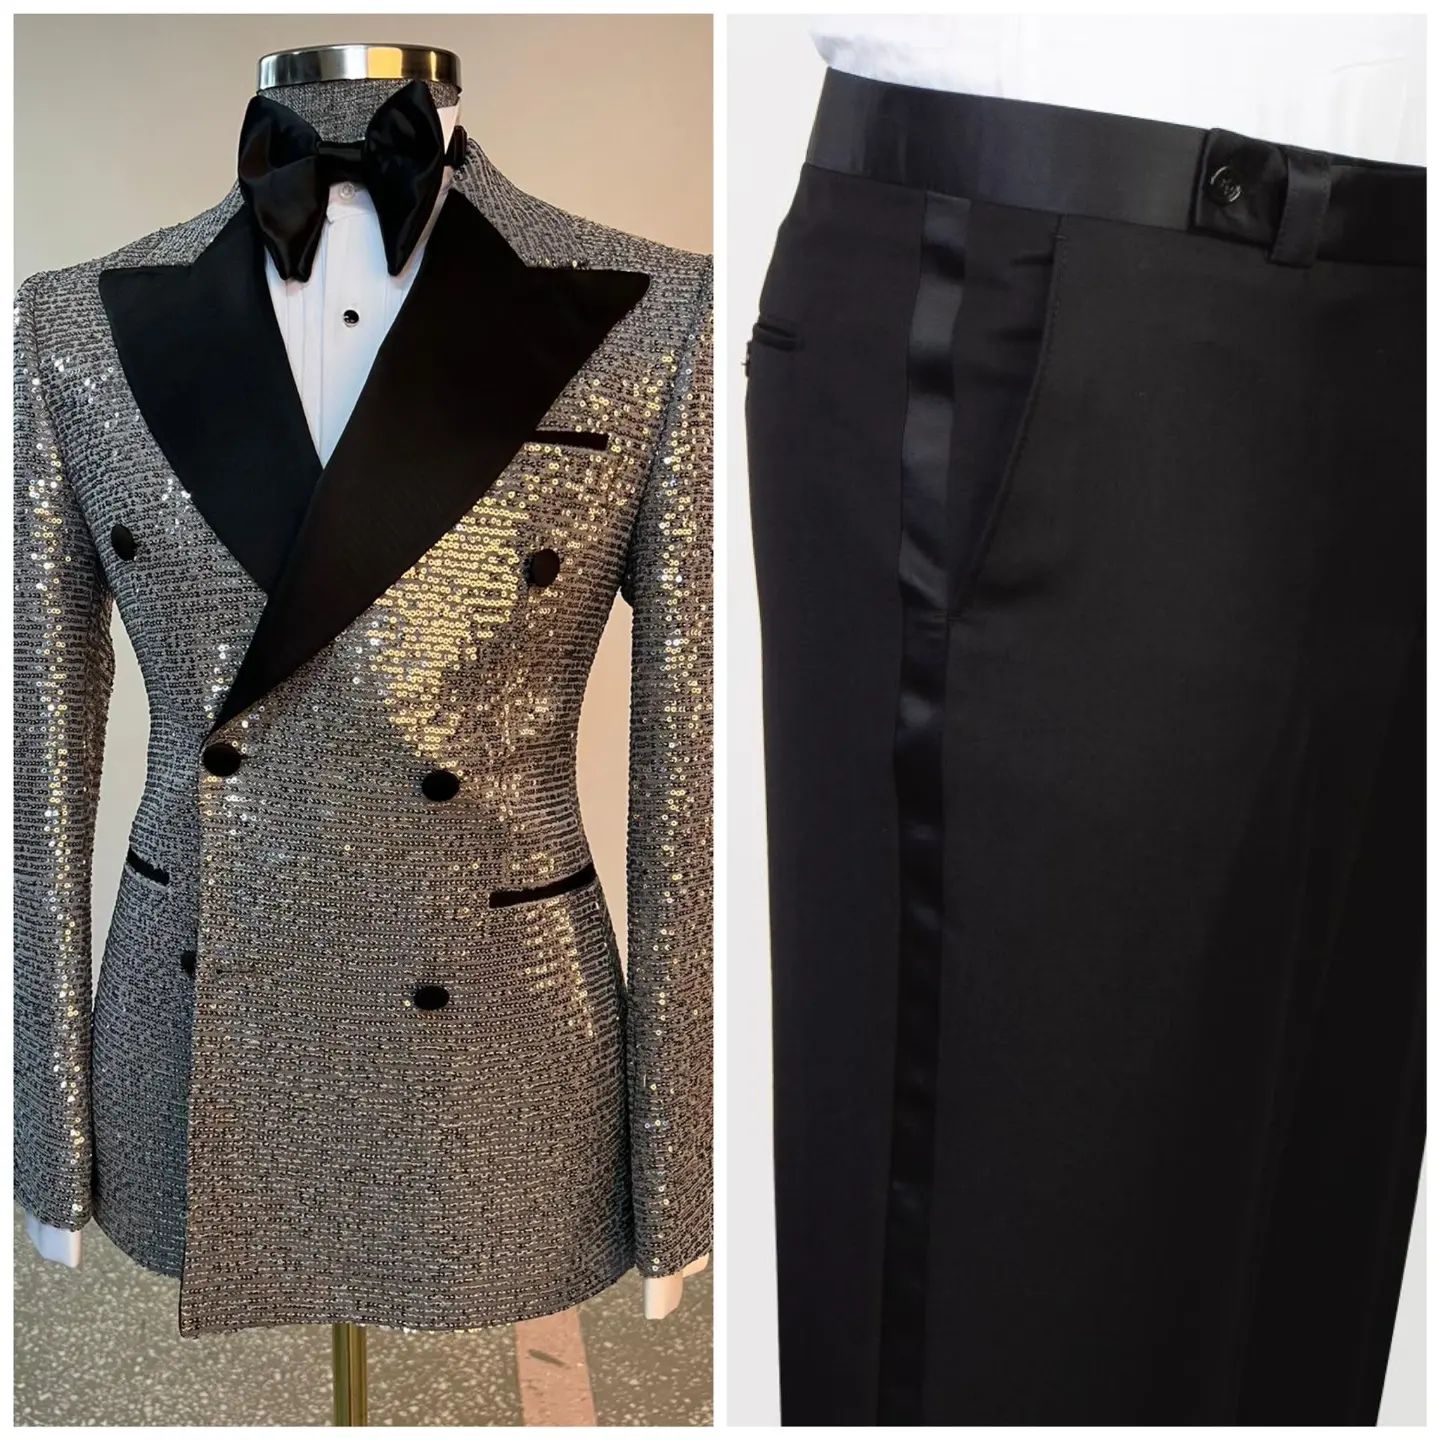 Sparkly Men Suits For Wedding Peaked Lapel Groom Wear Double Breasted Tuxedos Coat With Pants Prom Evening Party Anpassa